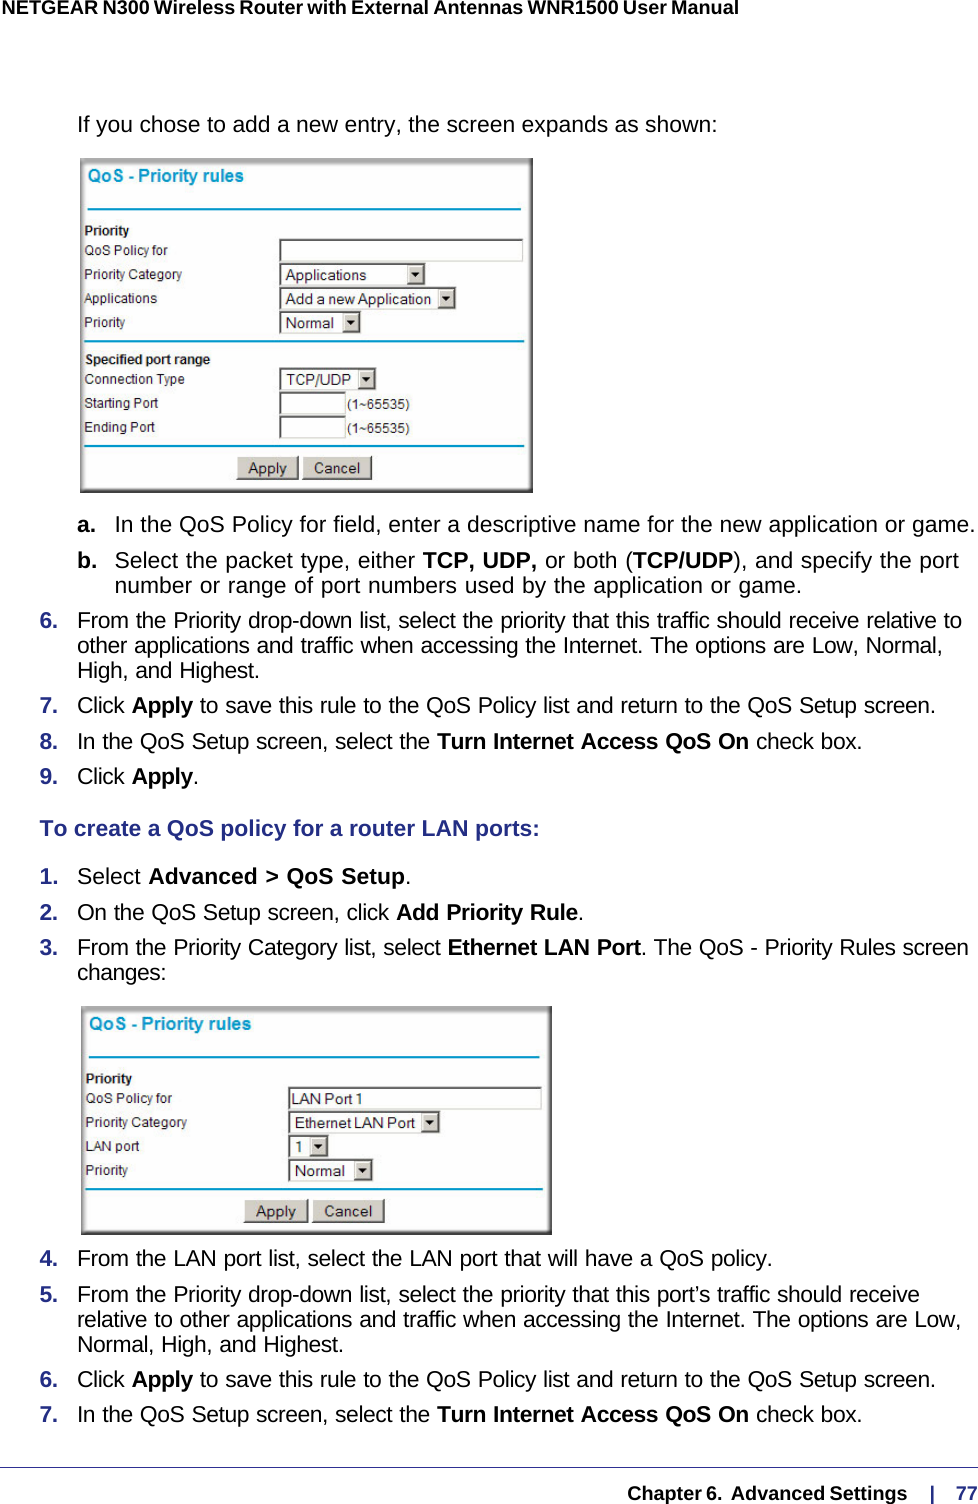   Chapter 6.  Advanced Settings     |    77NETGEAR N300 Wireless Router with External Antennas WNR1500 User Manual If you chose to add a new entry, the screen expands as shown:a.  In the QoS Policy for field, enter a descriptive name for the new application or game.b.  Select the packet type, either TCP, UDP, or both (TCP/UDP), and specify the port number or range of port numbers used by the application or game.6.  From the Priority drop-down list, select the priority that this traffic should receive relative to other applications and traffic when accessing the Internet. The options are Low, Normal, High, and Highest.7.  Click Apply to save this rule to the QoS Policy list and return to the QoS Setup screen.8.  In the QoS Setup screen, select the Turn Internet Access QoS On check box.9.  Click Apply.To create a QoS policy for a router LAN ports:1.  Select Advanced &gt; QoS Setup. 2.  On the QoS Setup screen, click Add Priority Rule. 3.  From the Priority Category list, select Ethernet LAN Port. The QoS - Priority Rules screen changes:4.  From the LAN port list, select the LAN port that will have a QoS policy.5.  From the Priority drop-down list, select the priority that this port’s traffic should receive relative to other applications and traffic when accessing the Internet. The options are Low, Normal, High, and Highest.6.  Click Apply to save this rule to the QoS Policy list and return to the QoS Setup screen.7.  In the QoS Setup screen, select the Turn Internet Access QoS On check box.